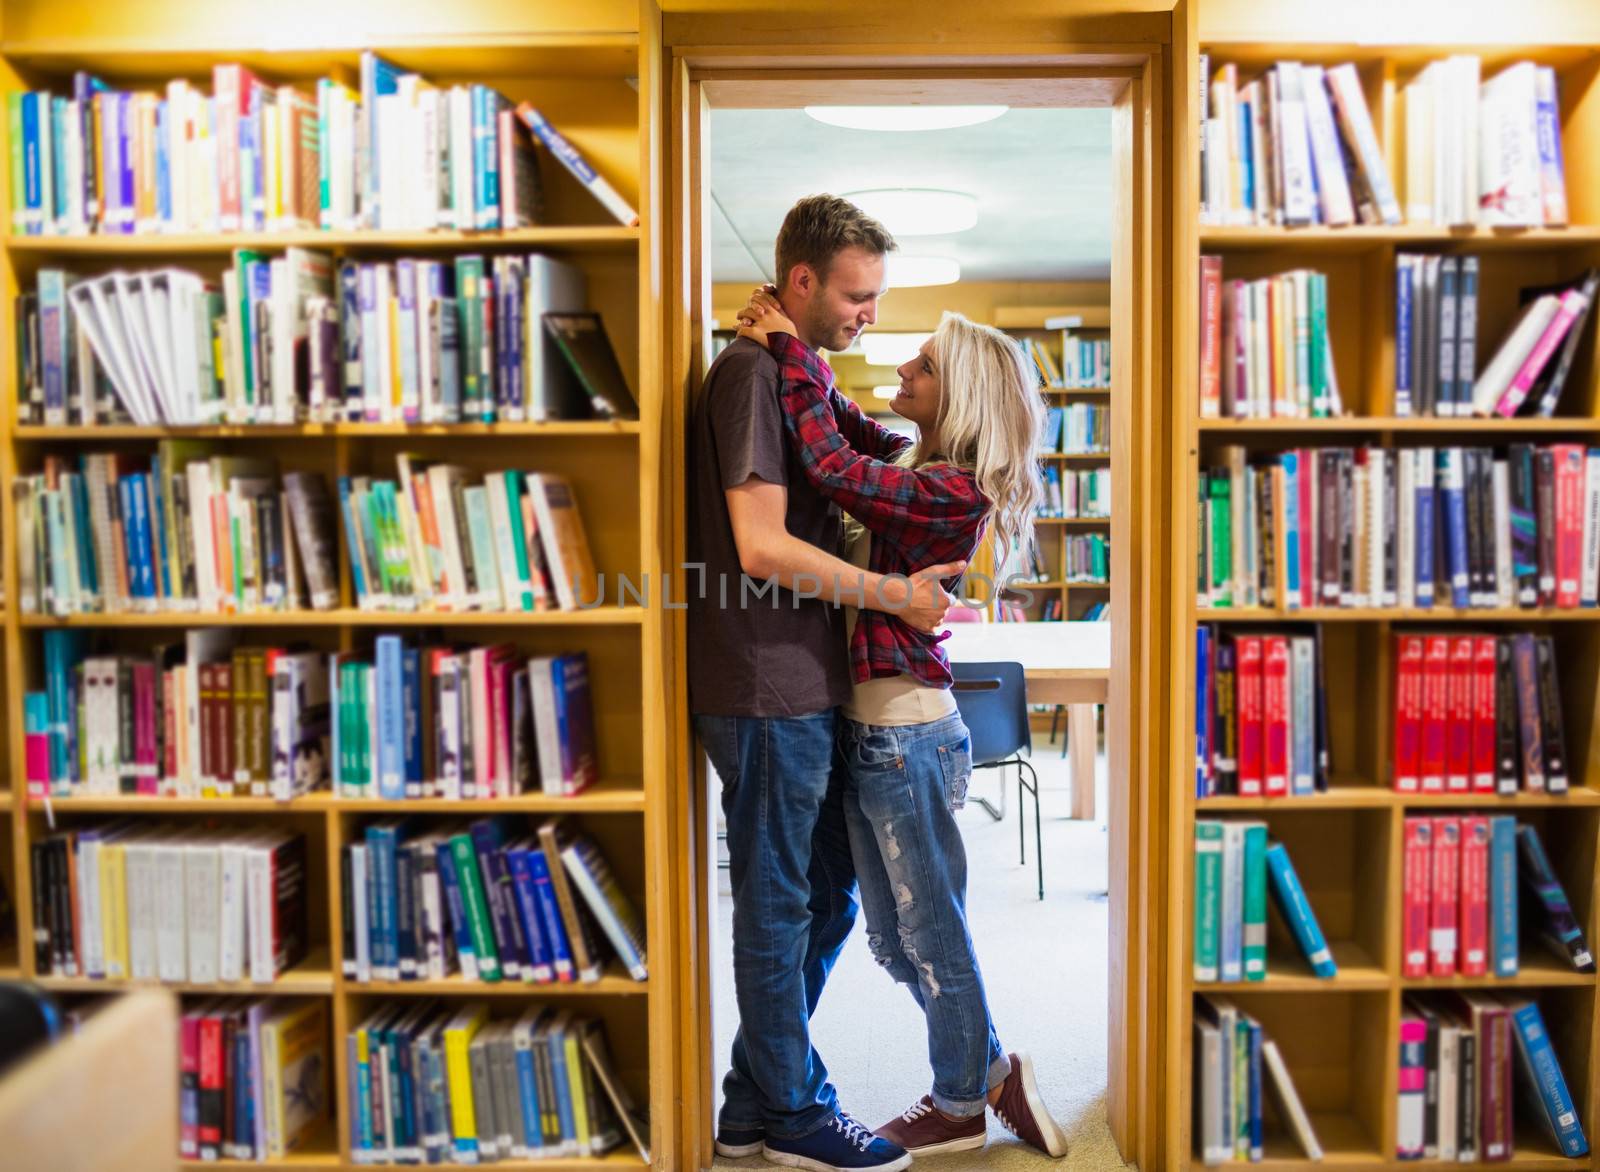 Romantic couple embracing by bookshelves in library by Wavebreakmedia